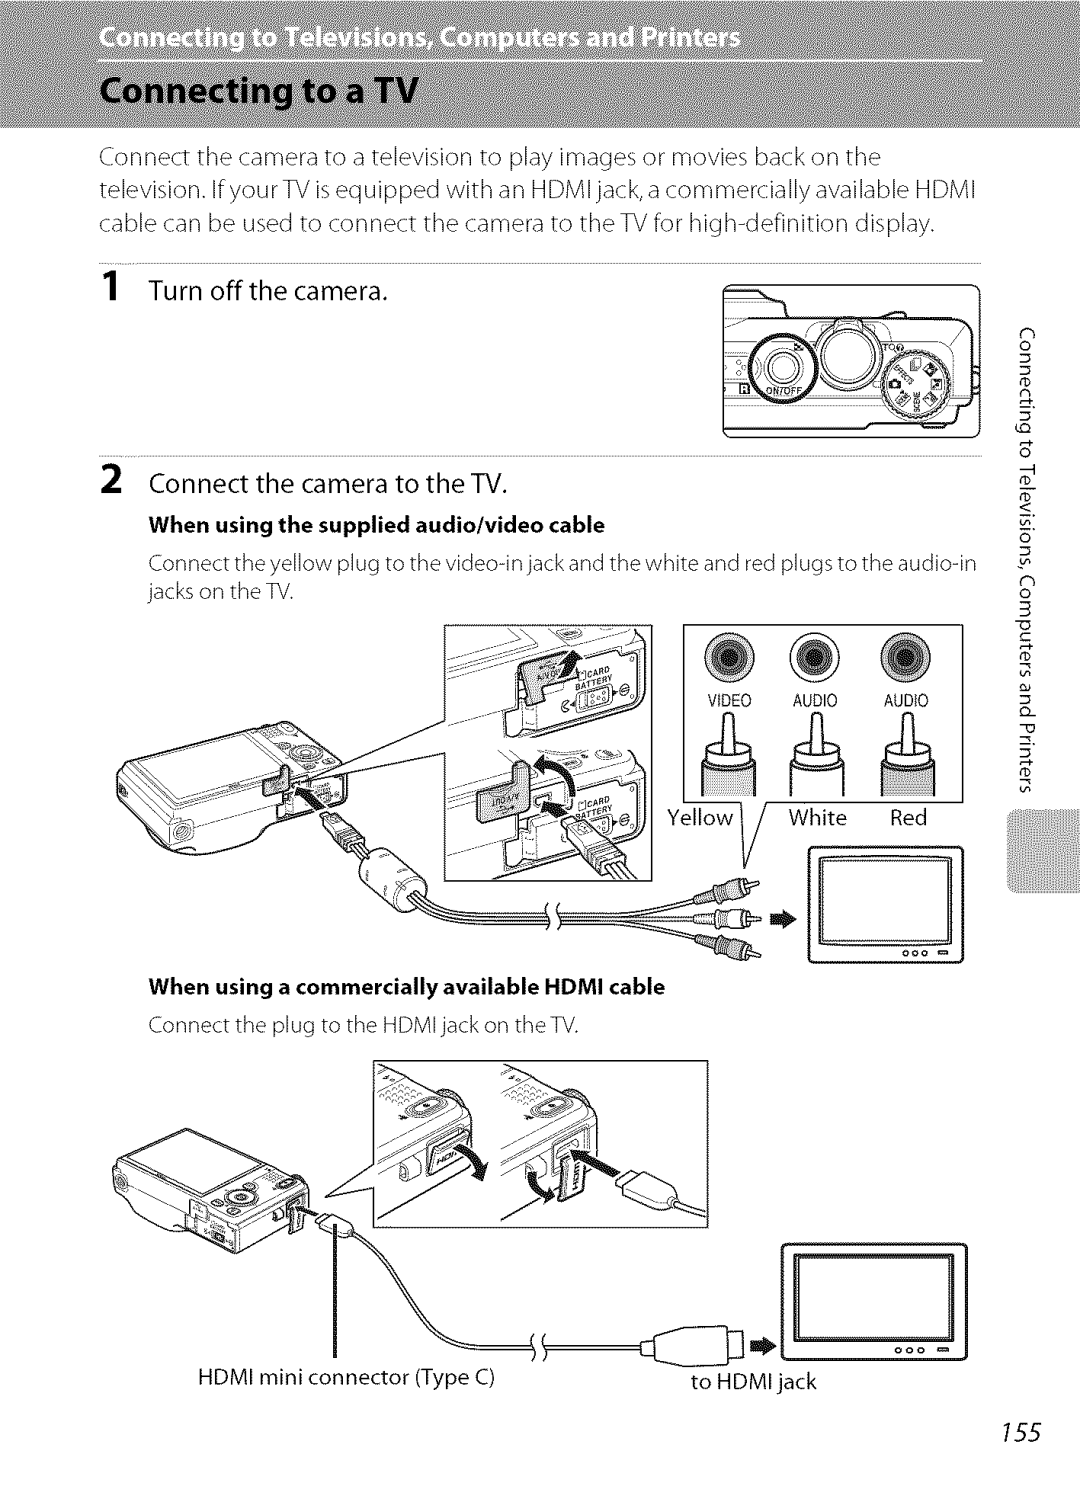 Nikon S9100 user manual Connect the camera to the TV 